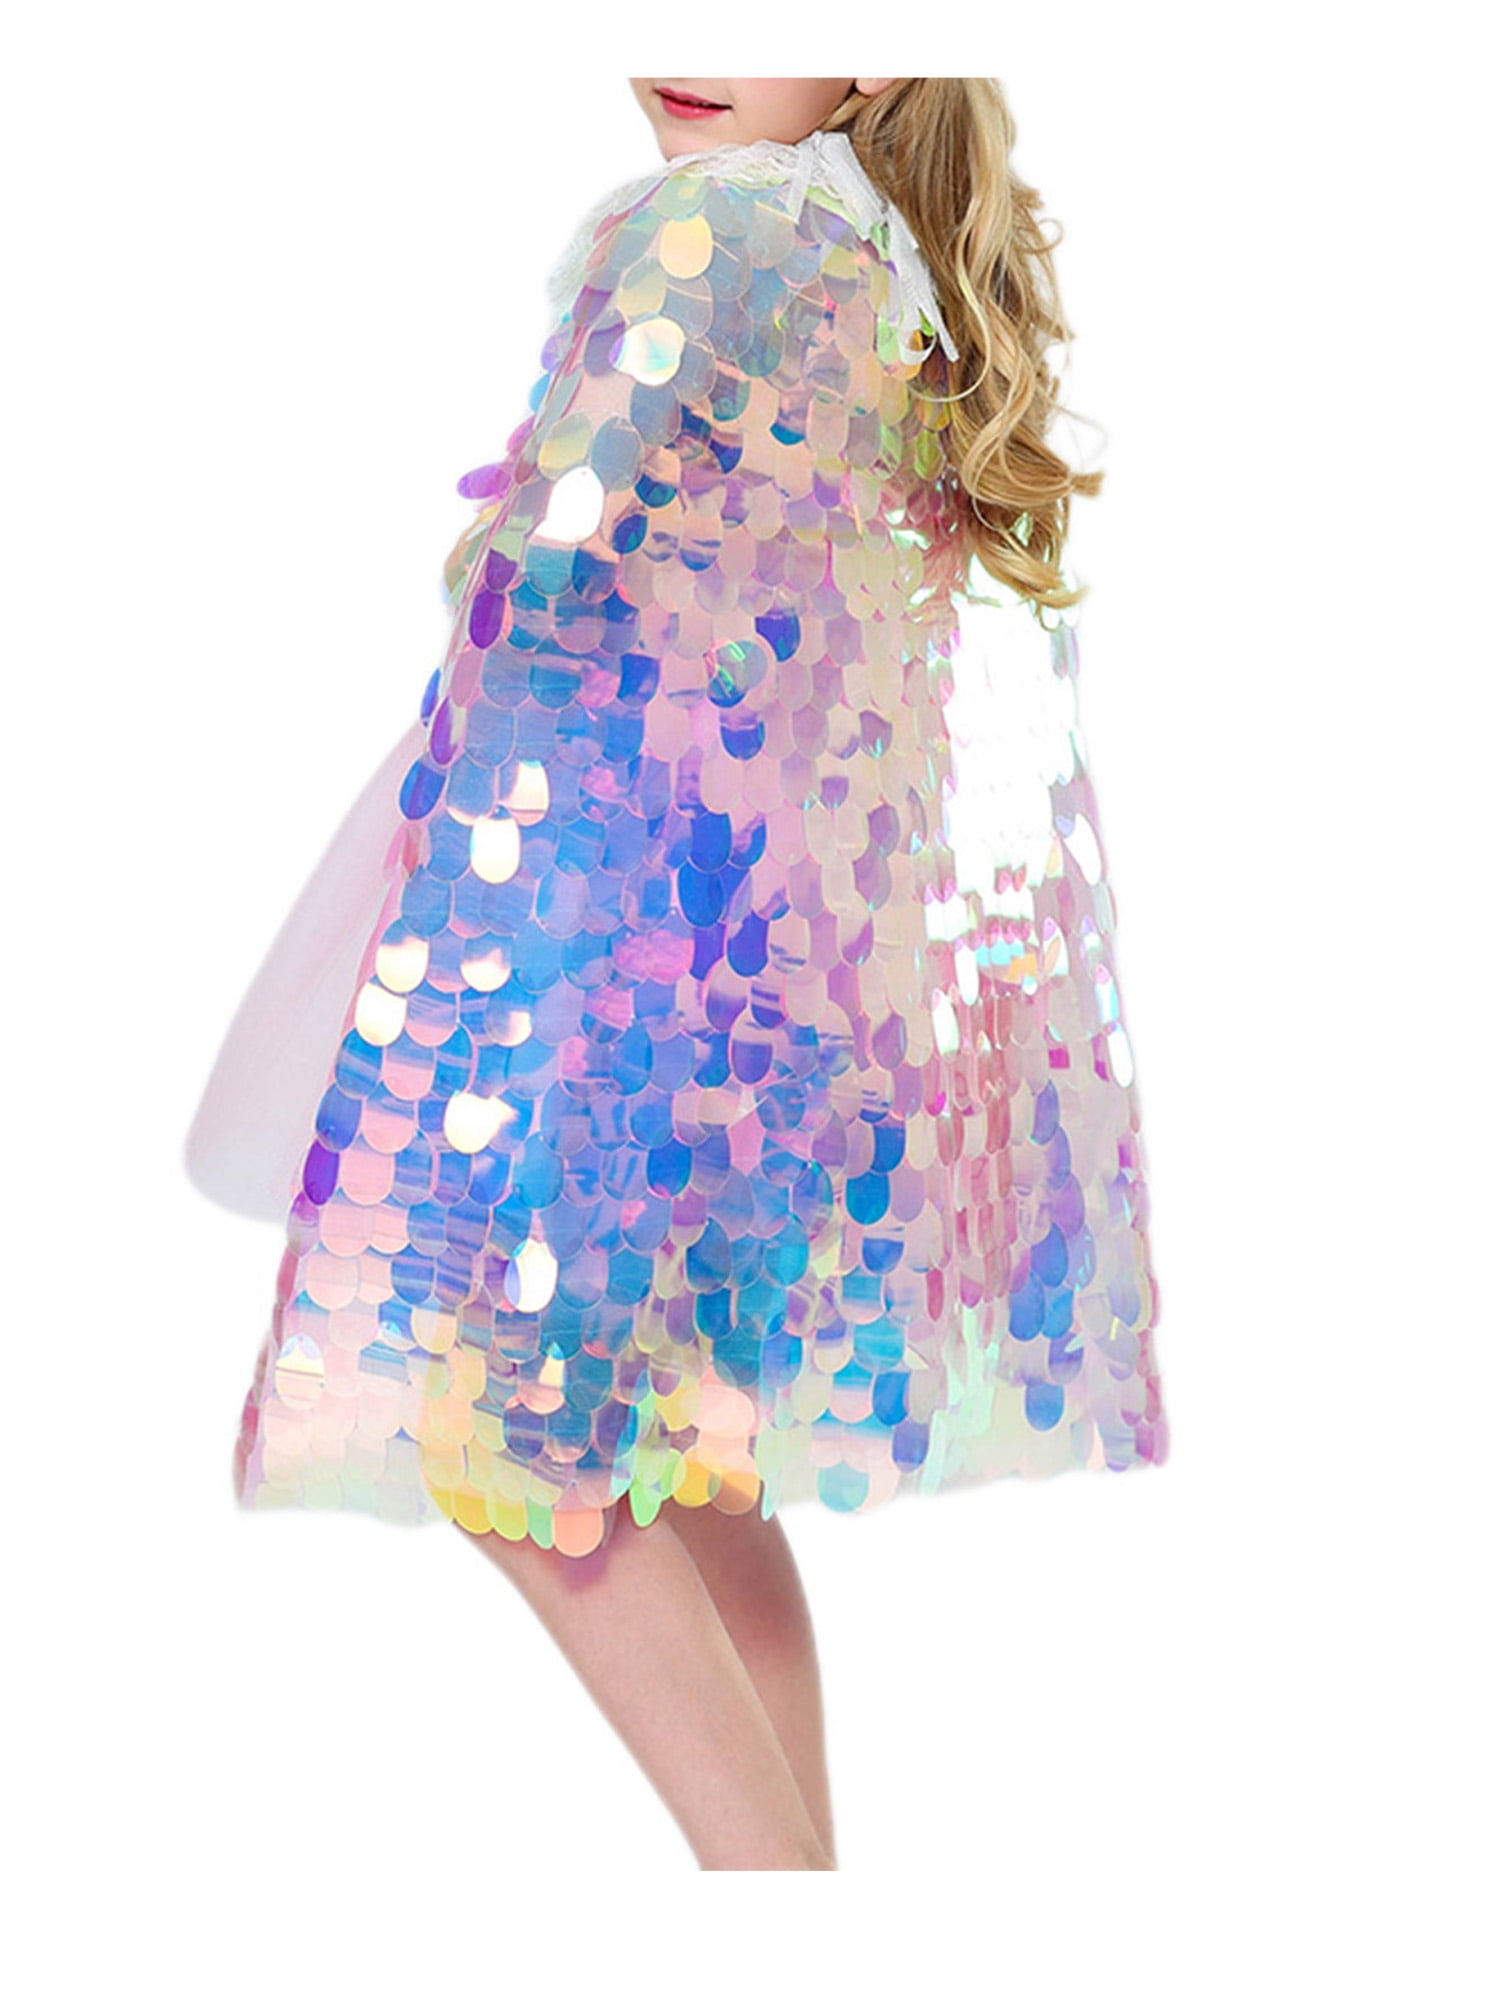 Multifit Princess Capes Colorful Sequins Cloak for Girls-Halloween Birthday Party Costumes Dress up